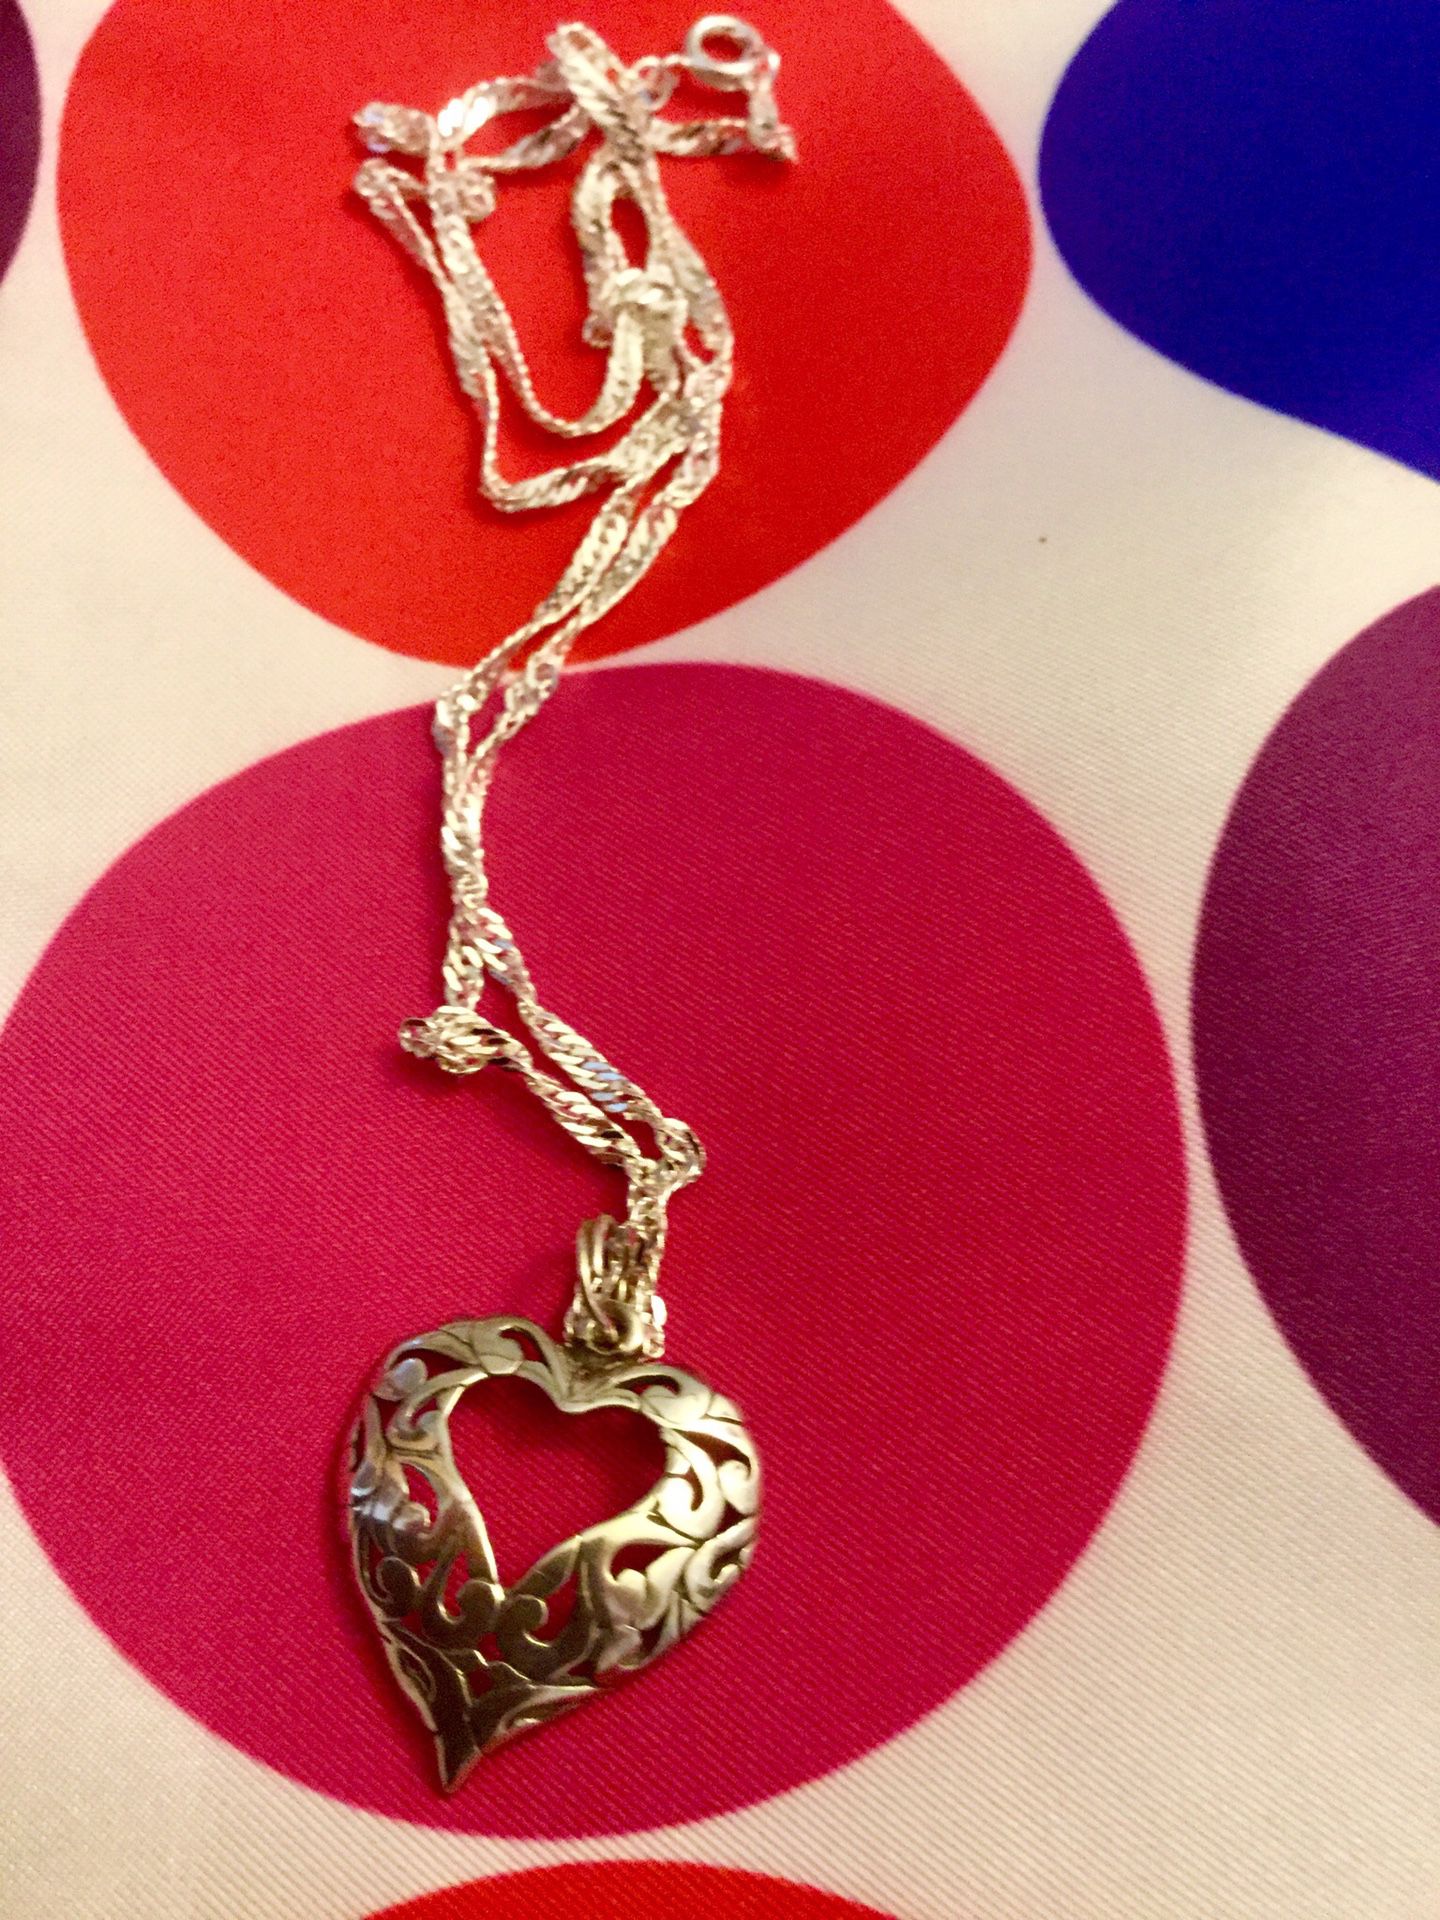 Heart necklace ❤️🧡💛 Silver jewelry visit for more 💛❤️💛